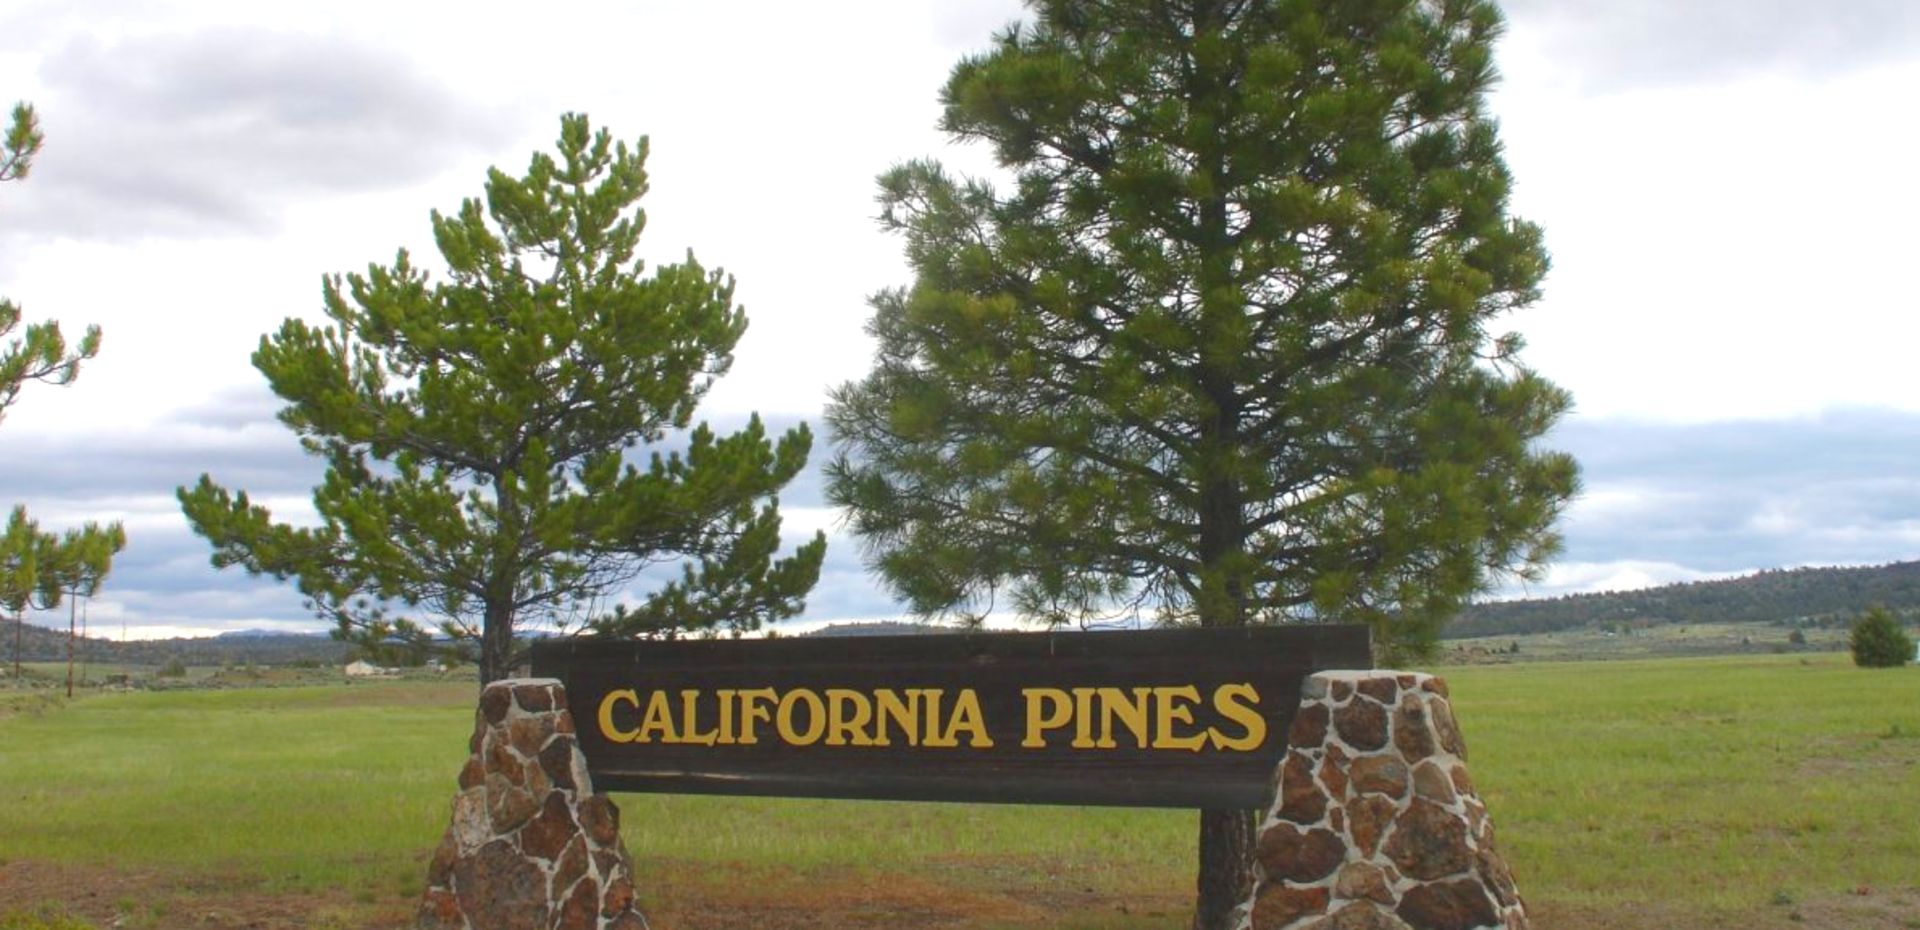 Build Your Home in the California Pines: An Tranquil Sanctuary for Outdoor Enthusiasts! - Image 16 of 16